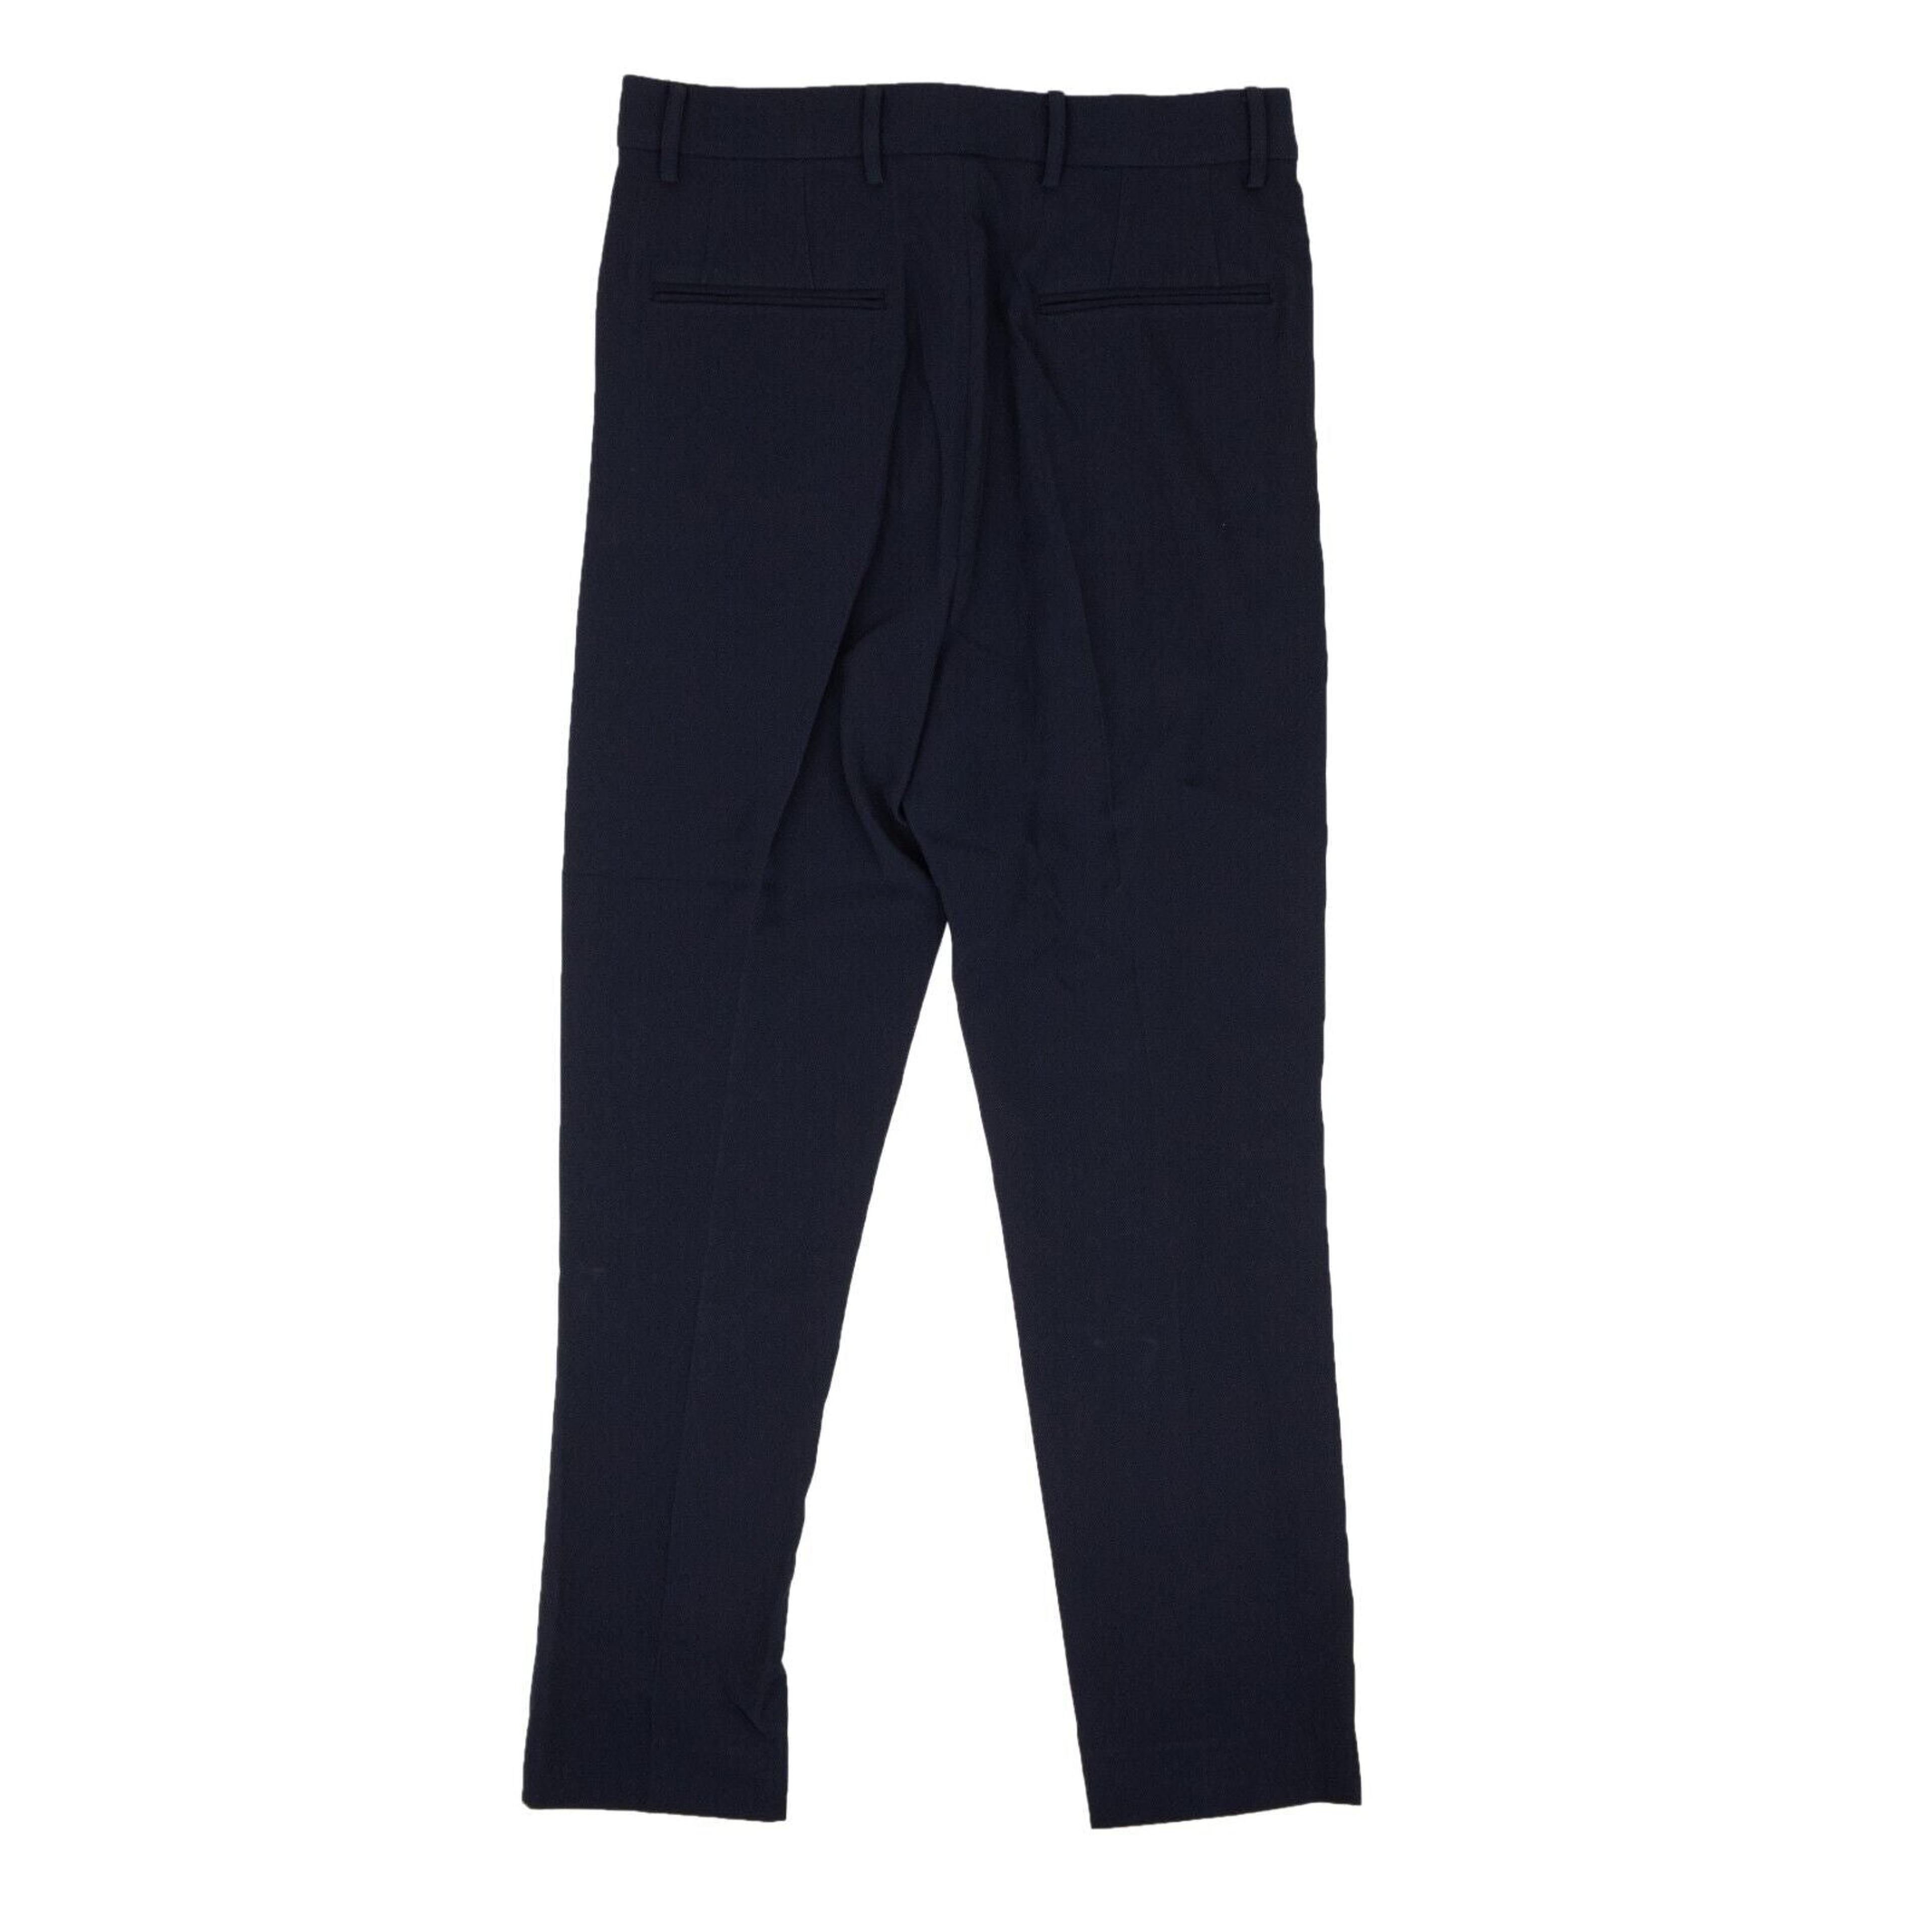 Alternate View 2 of Navy Blue Polyester Twill Trousers